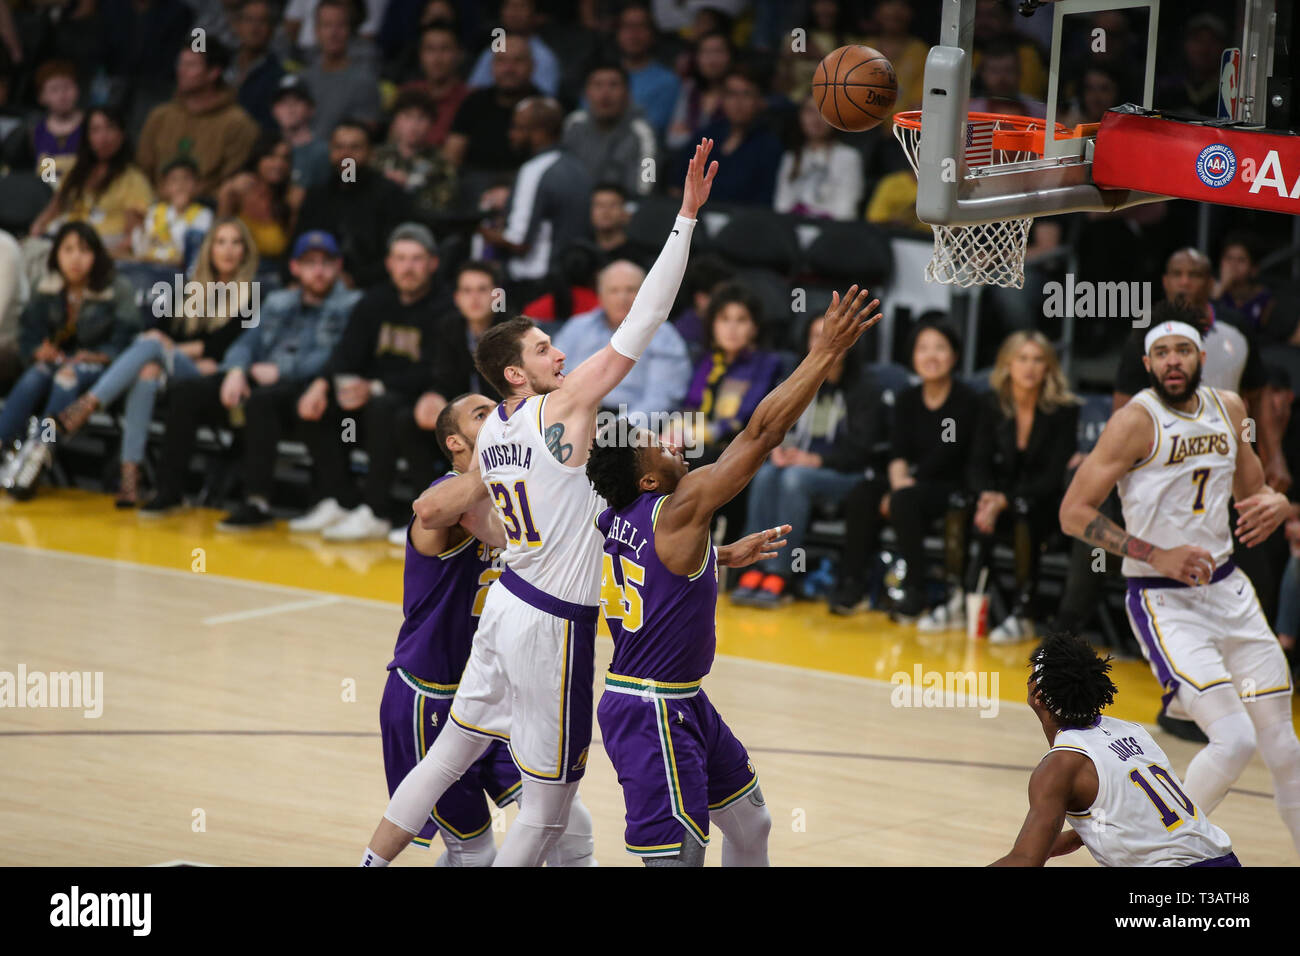 Los Angeles, USA. 7th Apr 2019. Utah Jazz guard Donovan Mitchell (45) with a lay-up during the Utah Jazz vs Los Angeles Lakers game at Staples Center in Los Angeles, CA. on April 7, 2019. (Photo by Jevone Moore) Credit: Cal Sport Media/Alamy Live News Stock Photo